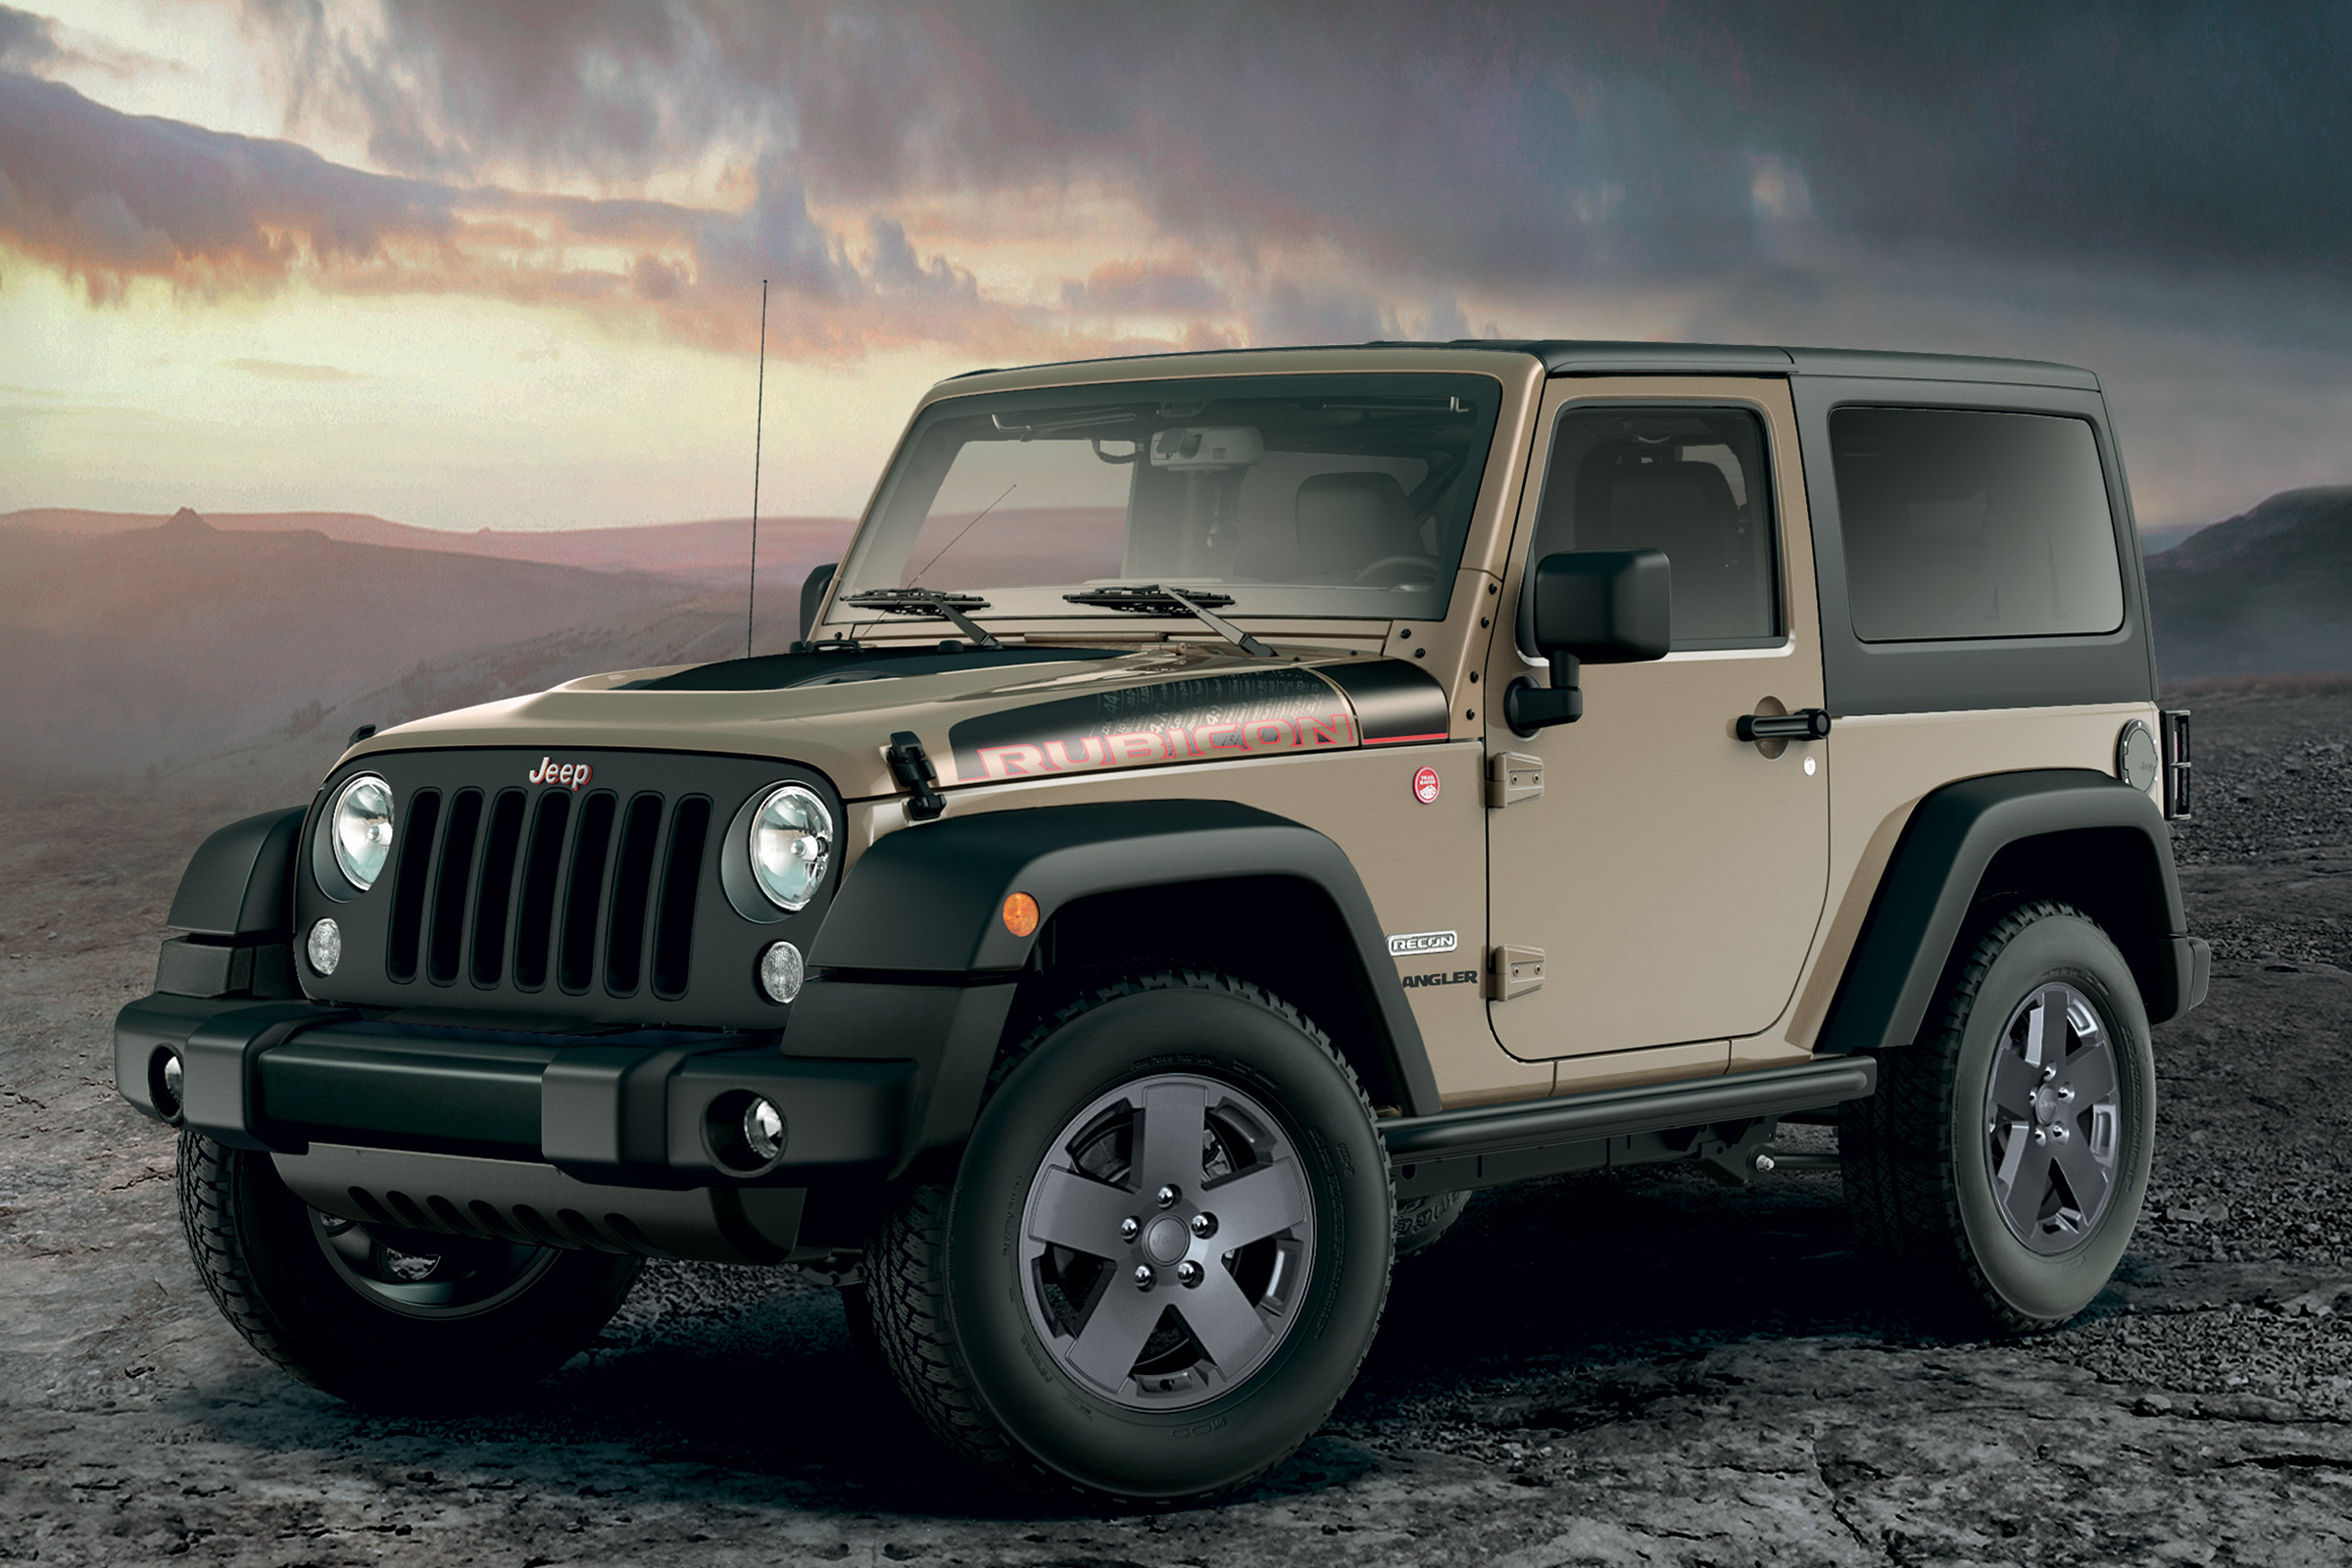 Jeep Wrangler Rubicon Recon special edition arrives in UK | Auto Express